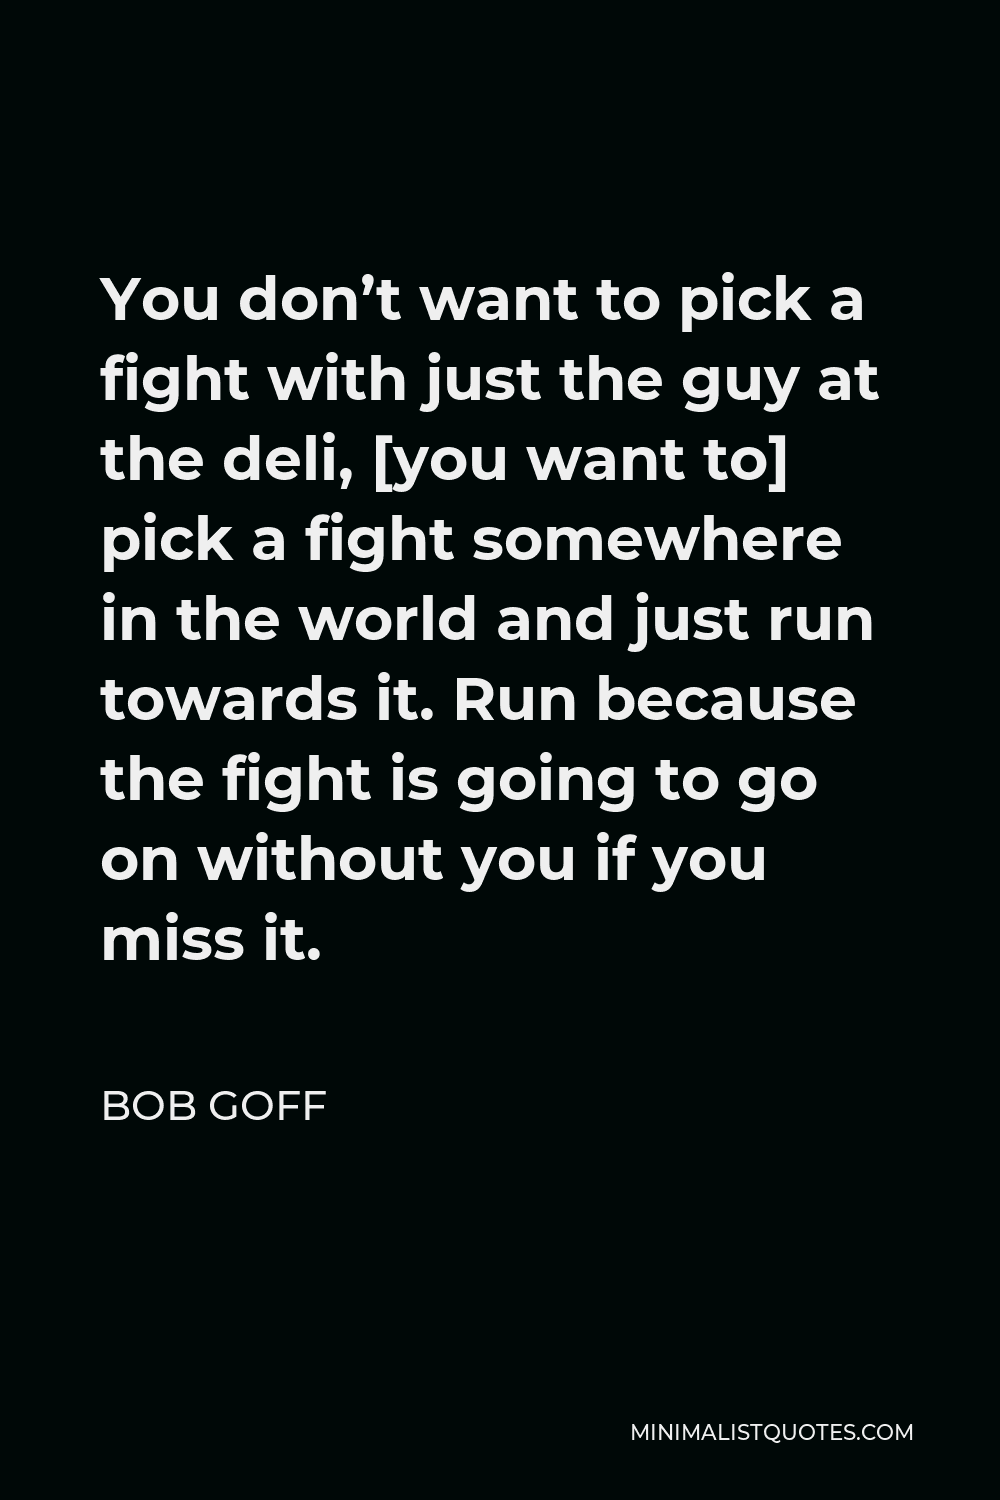 Bob Goff Quote - You don’t want to pick a fight with just the guy at the deli, [you want to] pick a fight somewhere in the world and just run towards it. Run because the fight is going to go on without you if you miss it.